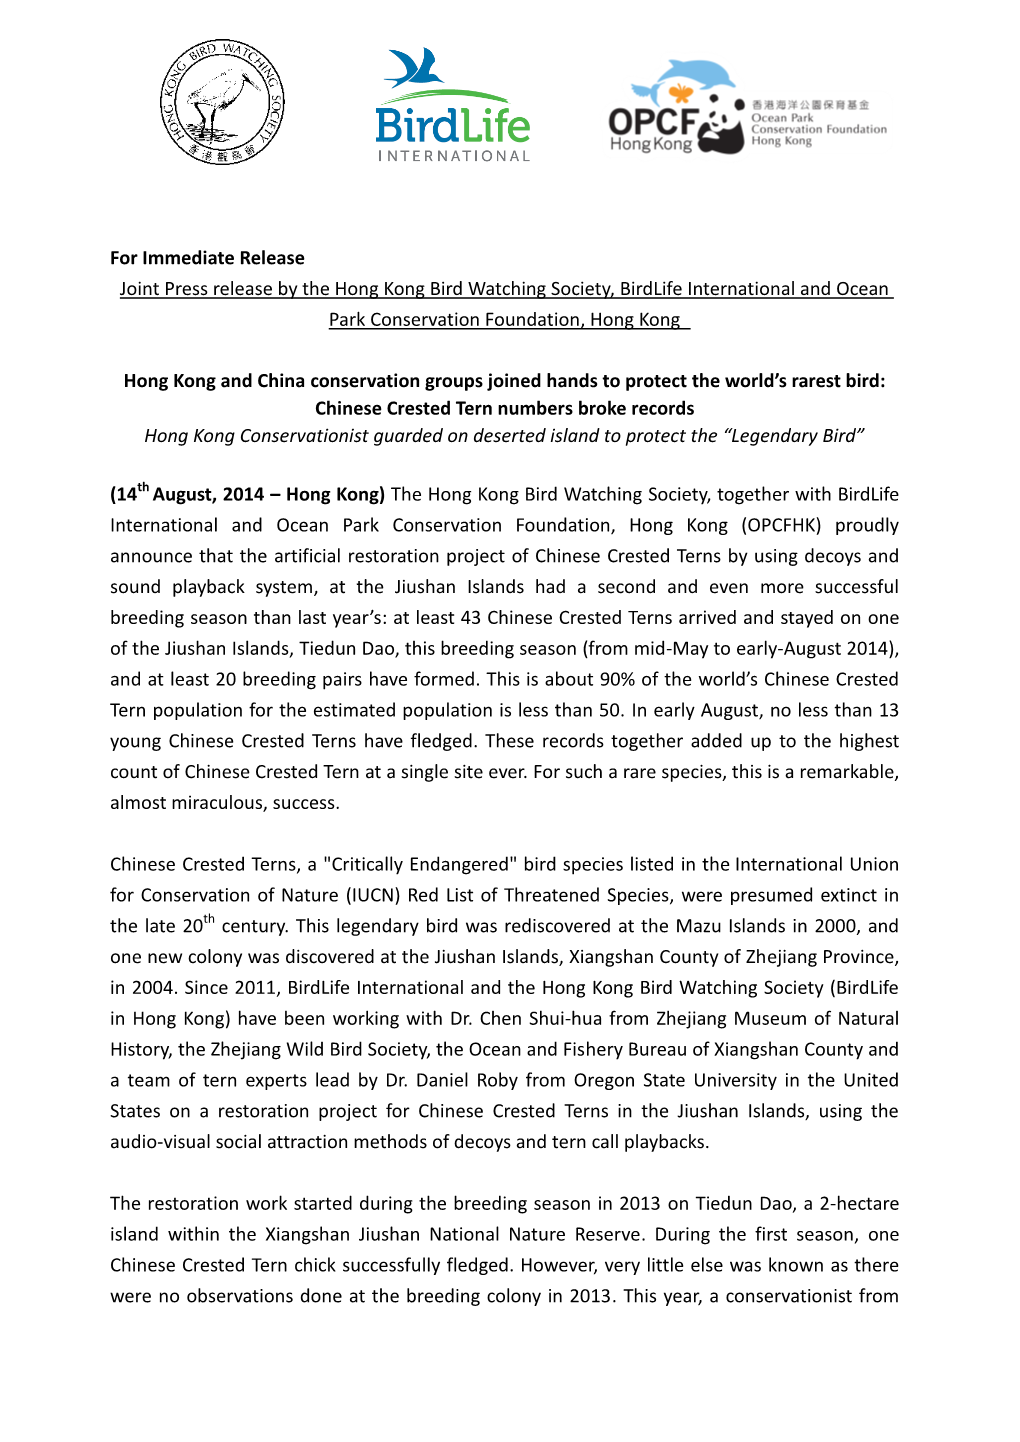 For Immediate Release Joint Press Release by the Hong Kong Bird Watching Society, Birdlife International and Ocean Park Conservation Foundation, Hong Kong